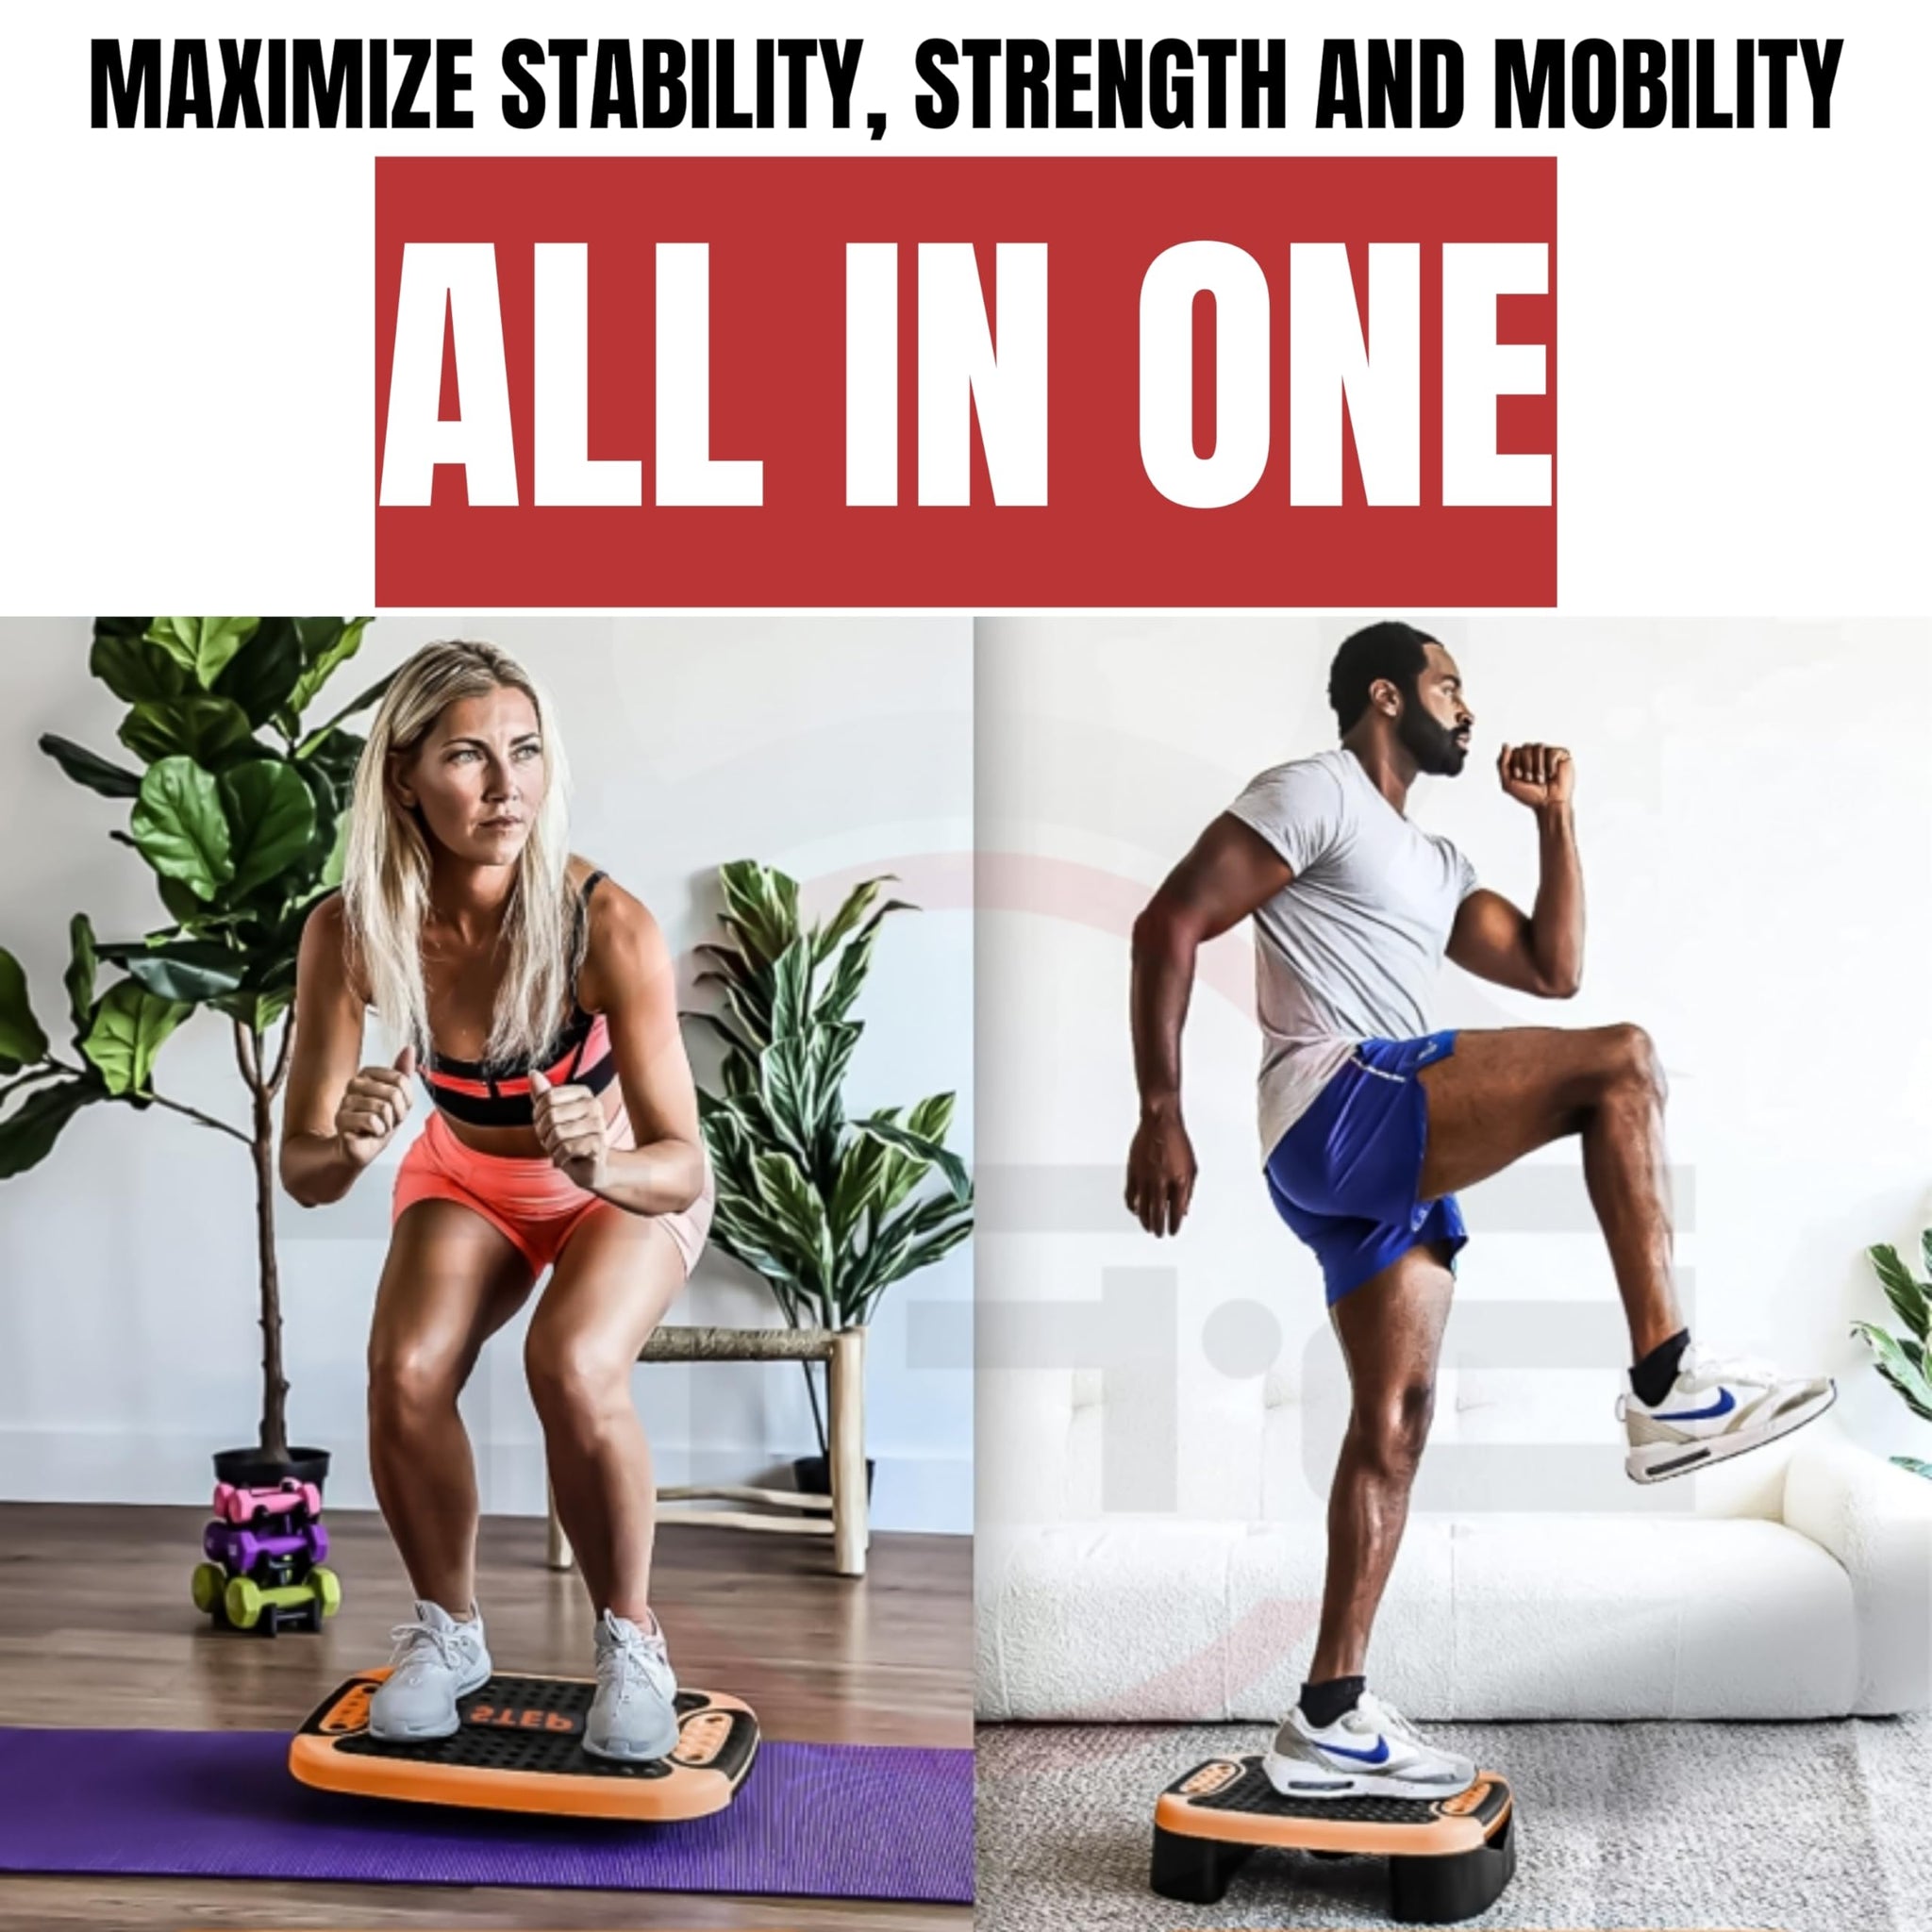 4 in 1 Multifunction Aerobic Step